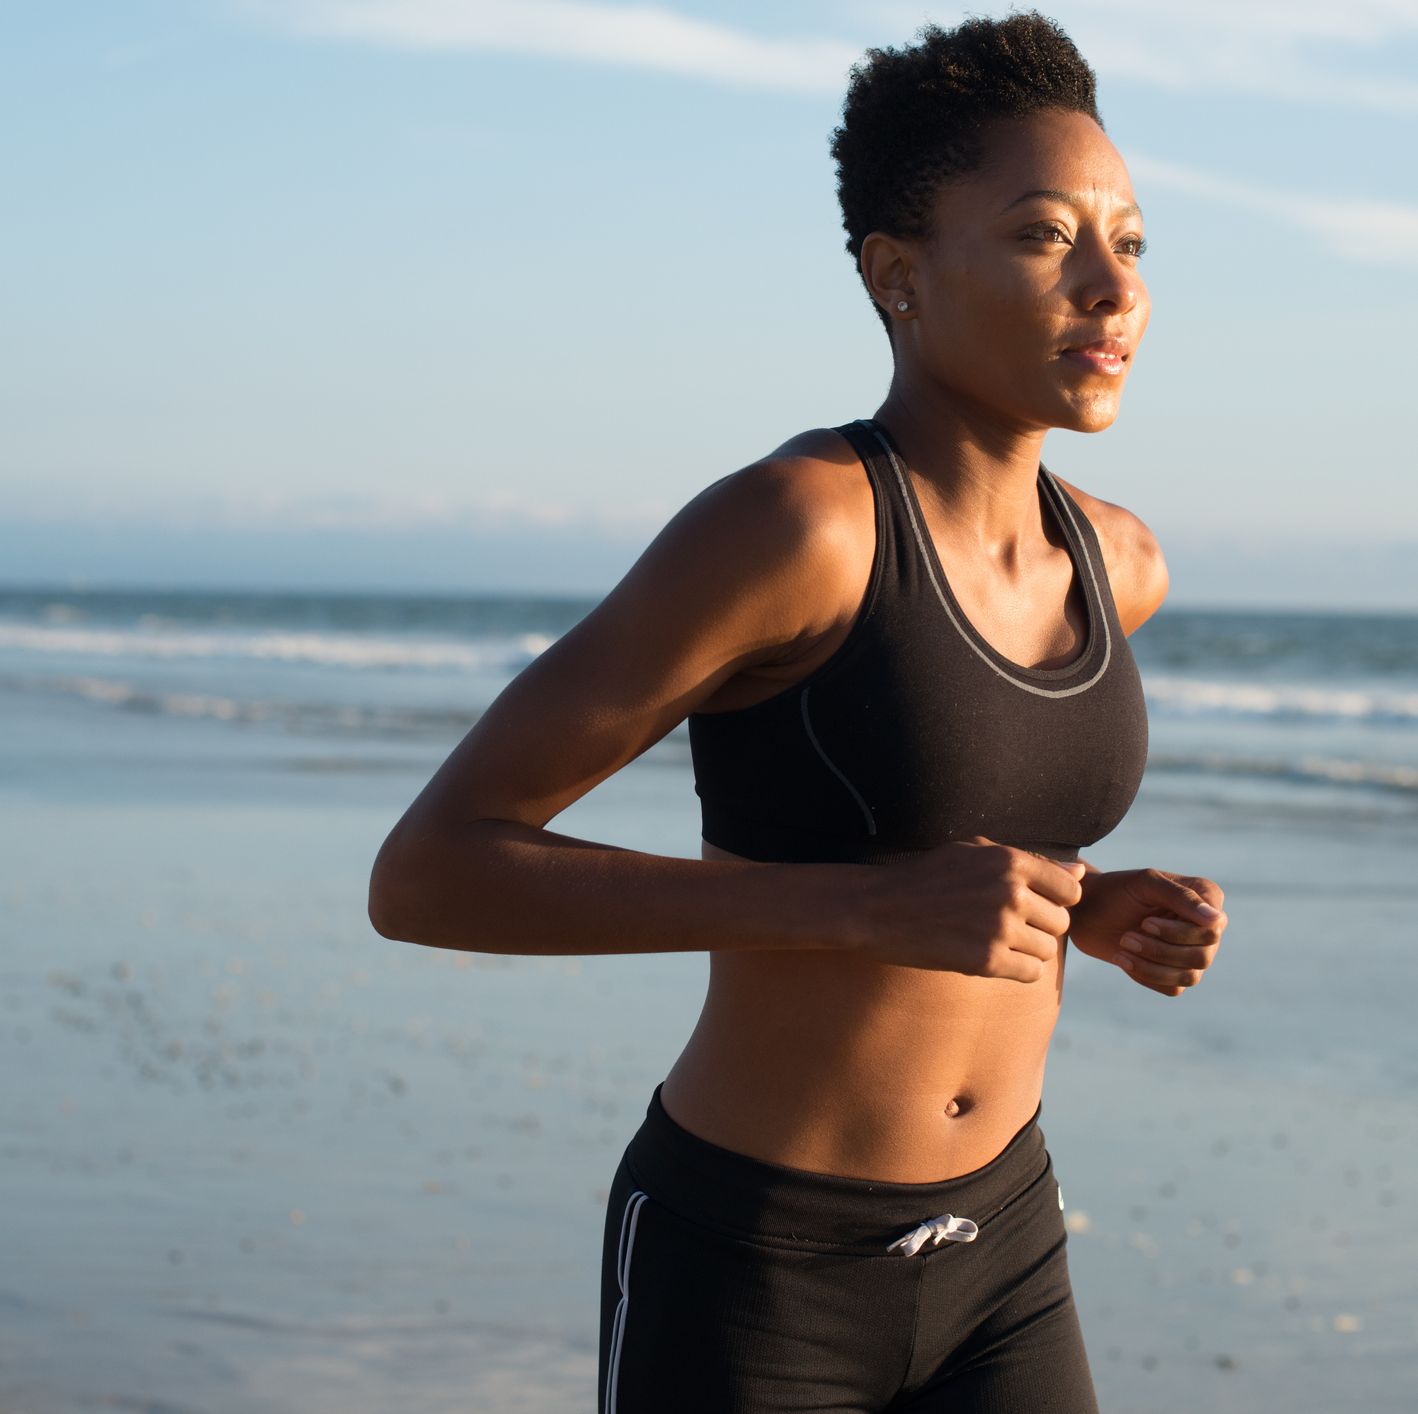 why do my breasts hurt after running